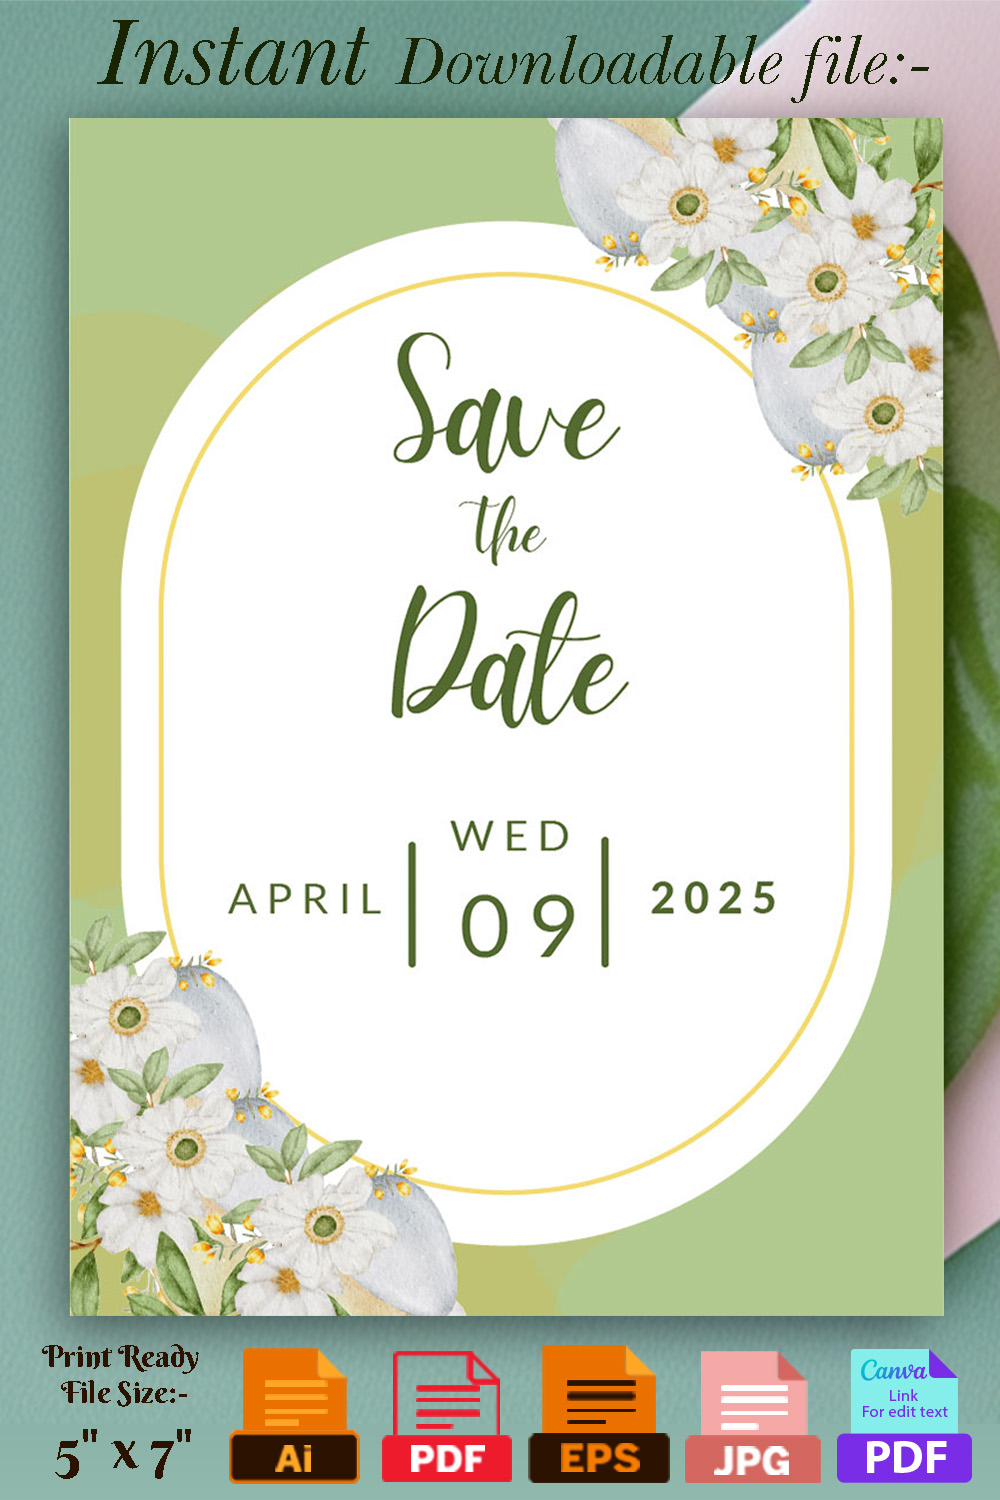 Image with enchanting wedding invitation in light green colors with white flower.